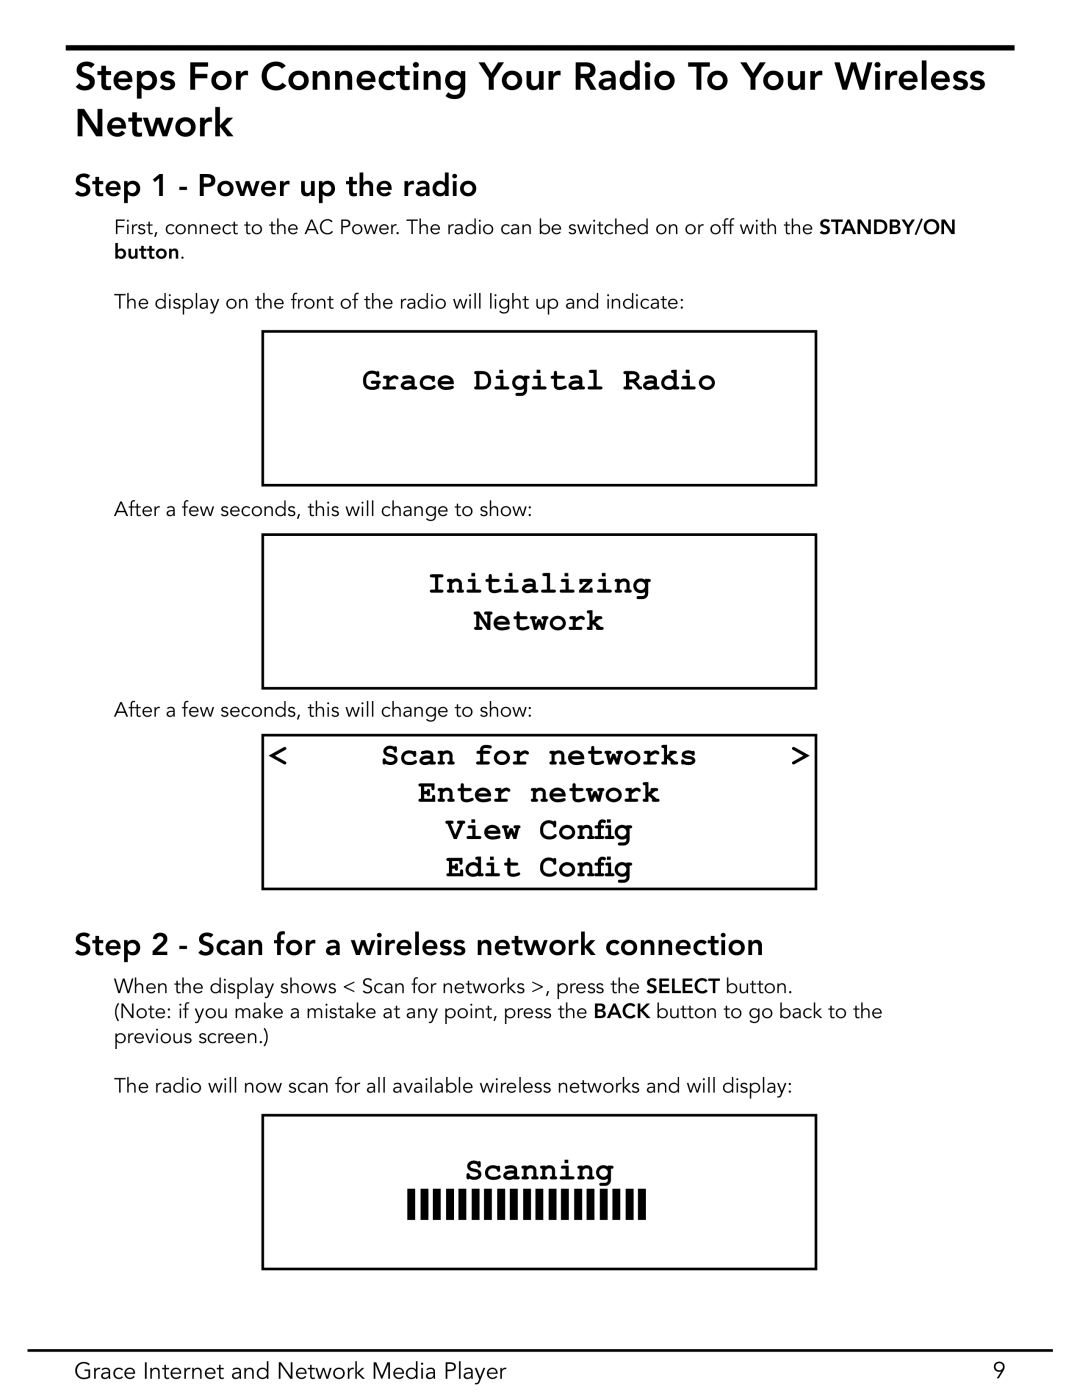 Grace GDI-IR3020 Power up the radio, Scan for a wireless network connection, Grace Digital Radio, Initializing Network 